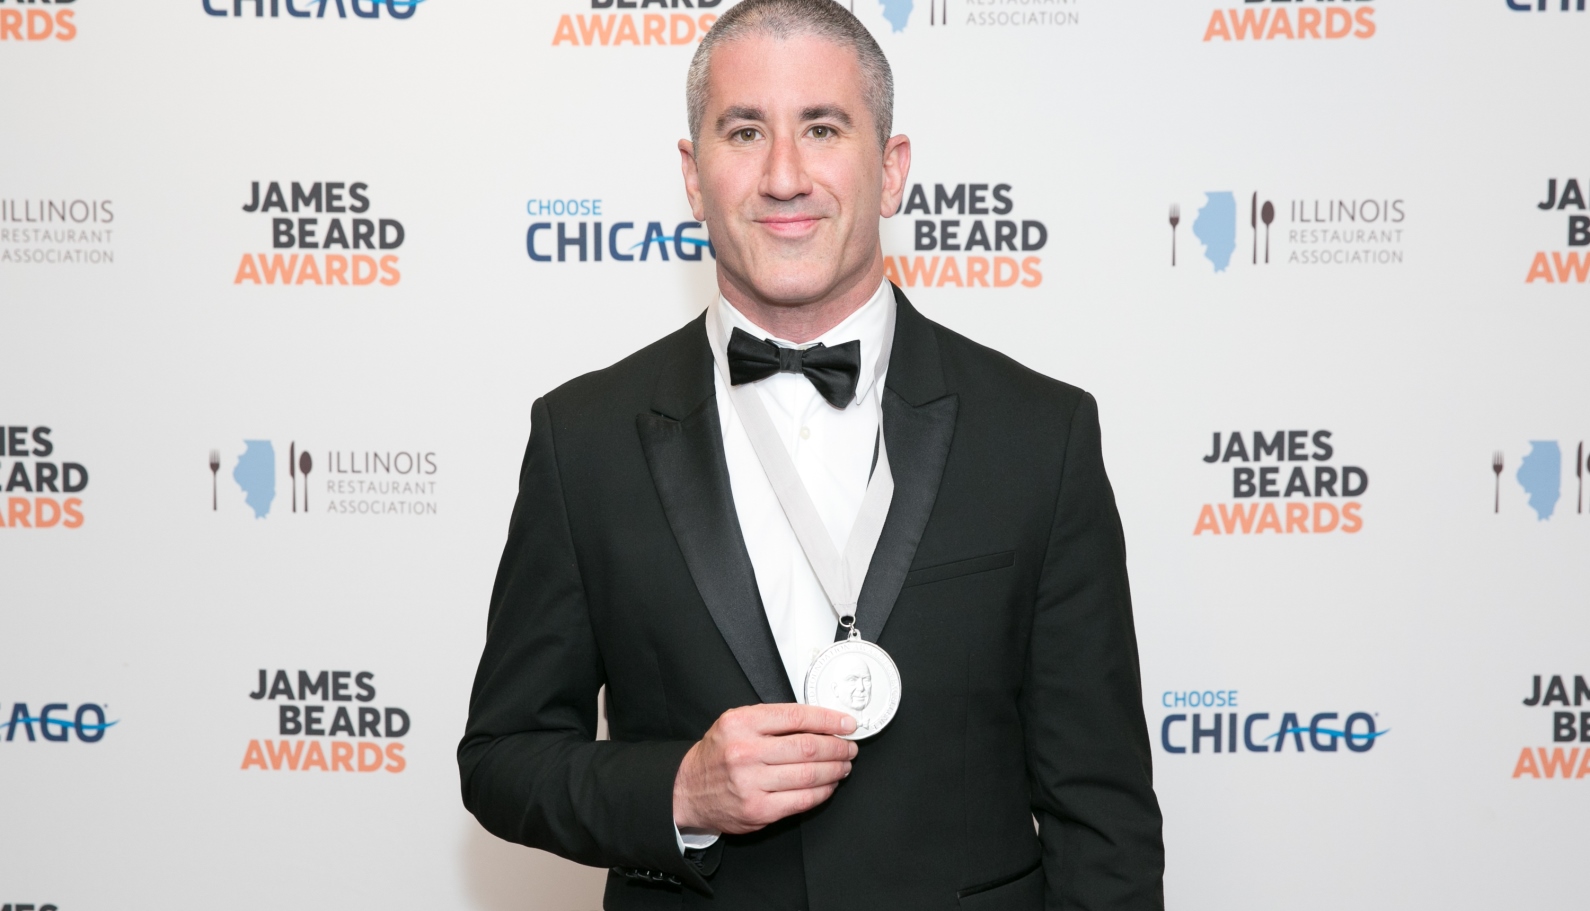 Outstanding Chef Michael Solomonov at the 2017 James Beard Foundation Awards in Chicago. Photo by Galdones Photography